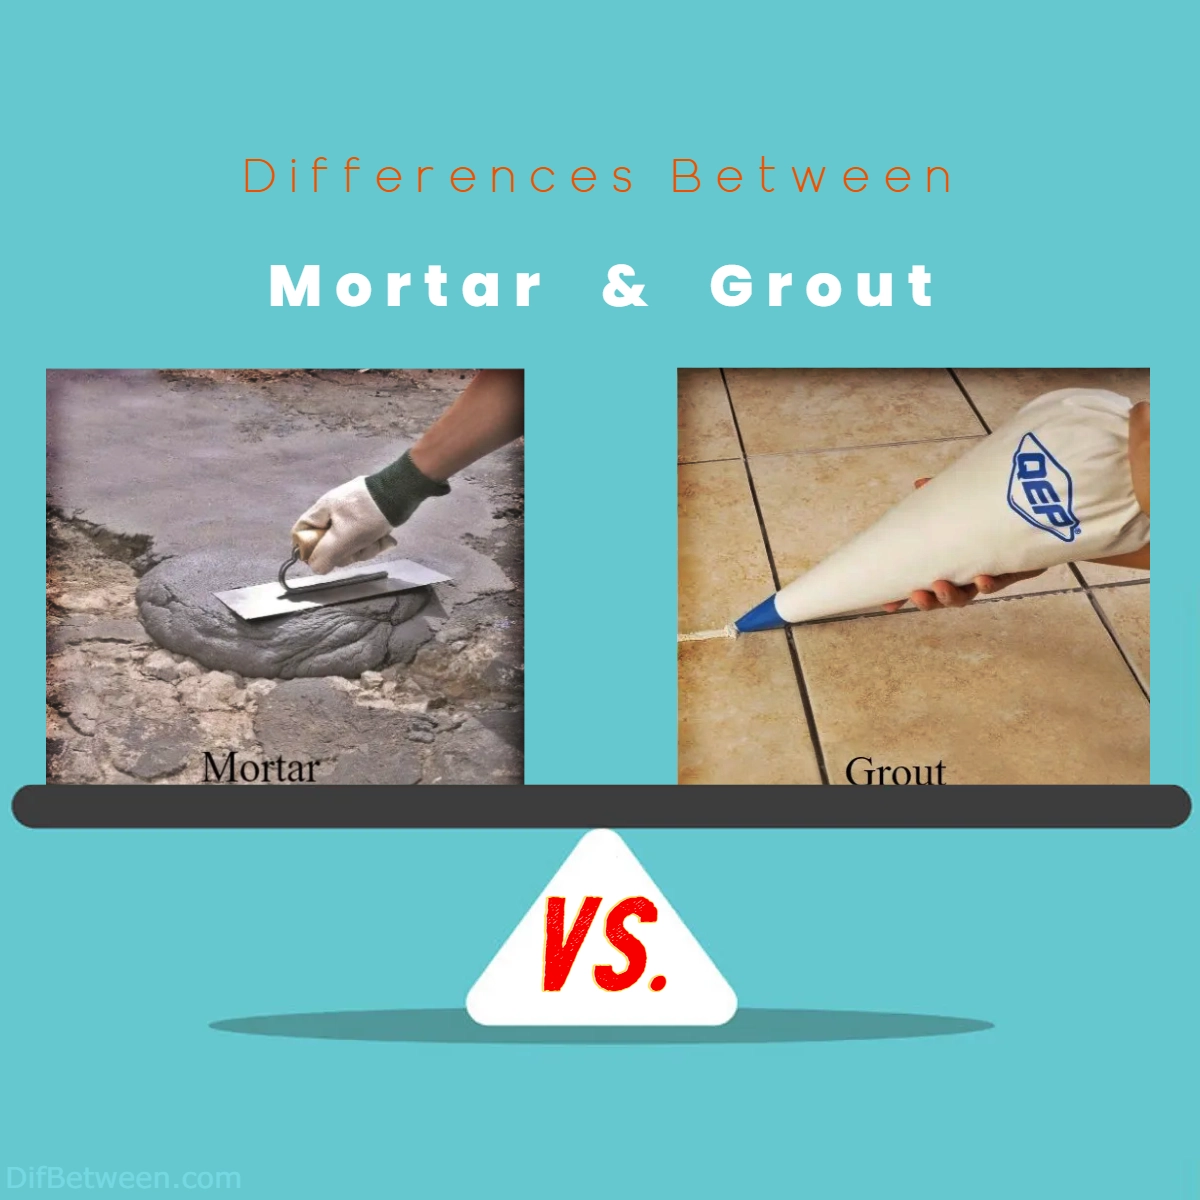 Difference Between Mortar and Grout